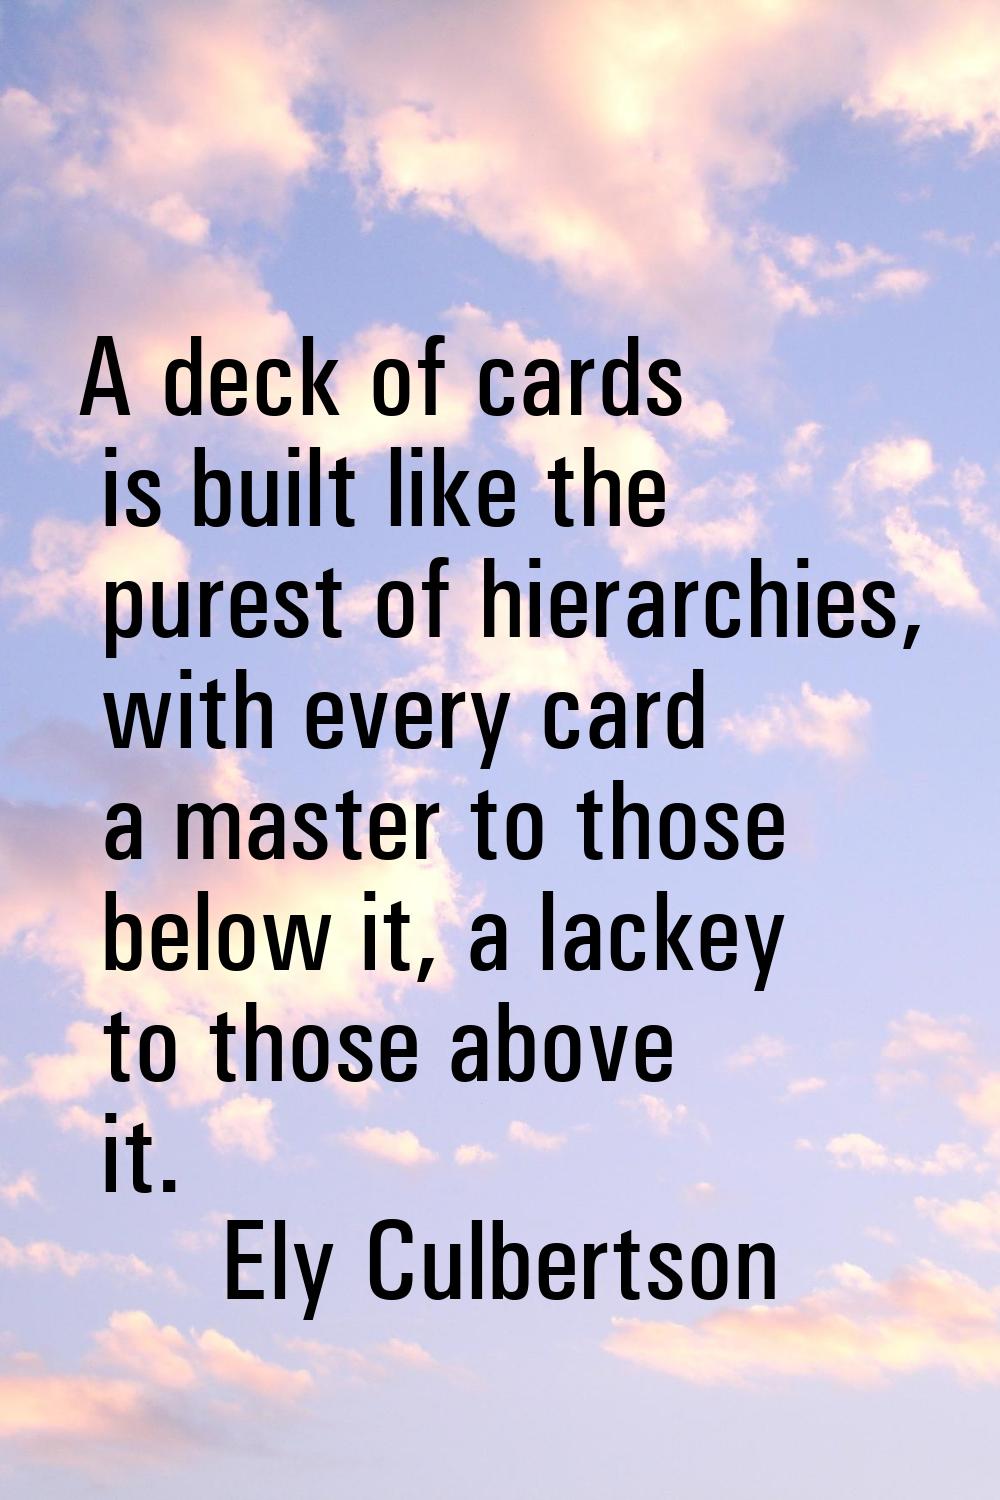 A deck of cards is built like the purest of hierarchies, with every card a master to those below it